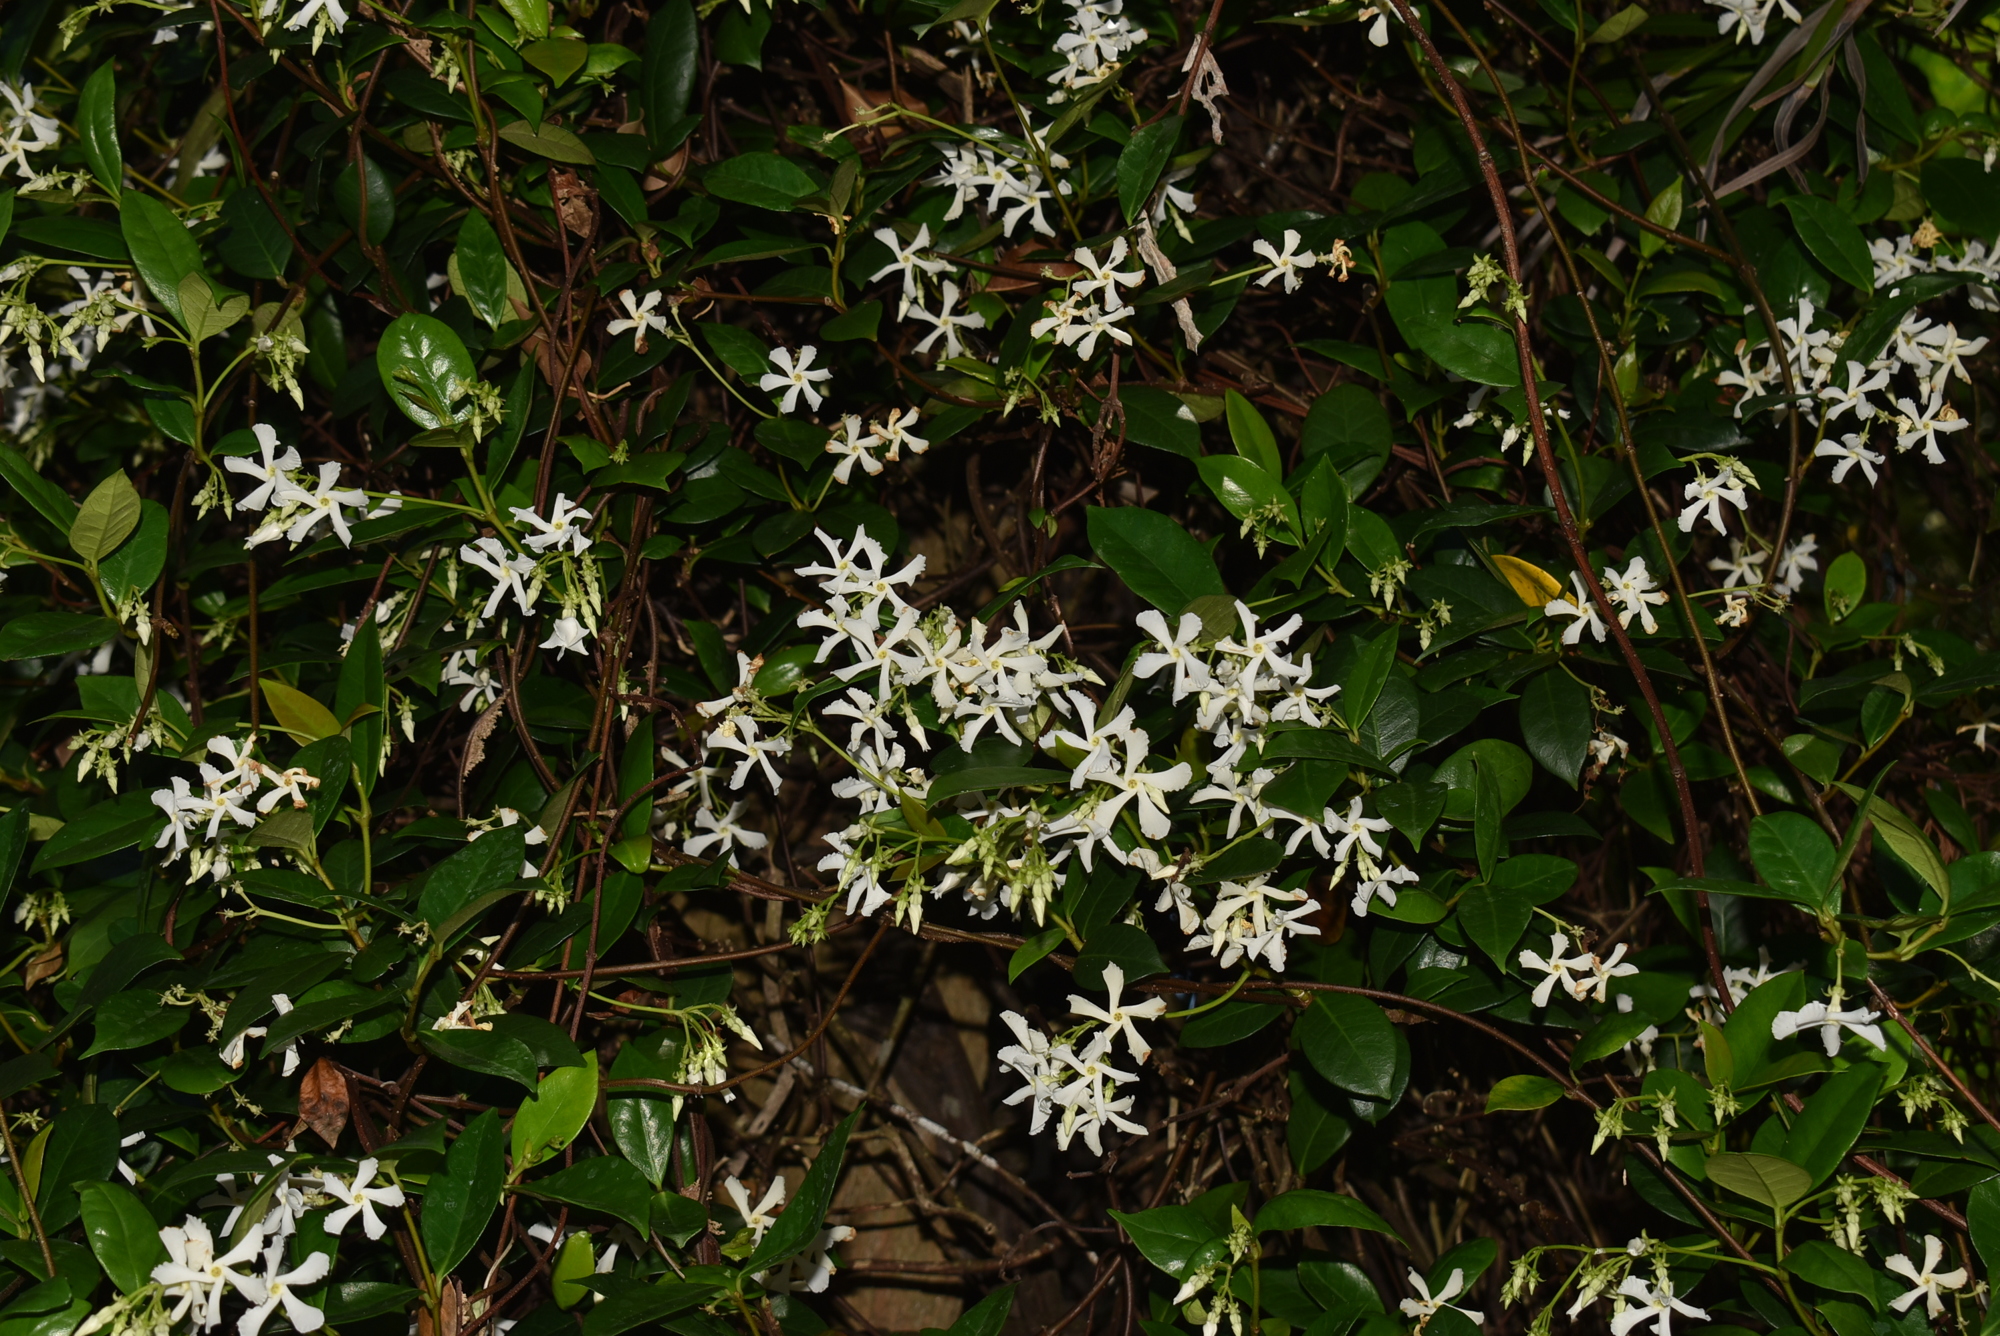 PHOTO B....The star jasmine is a hardy vine with plentiful flowers. Sometimes, the flowers are used in perfumes.